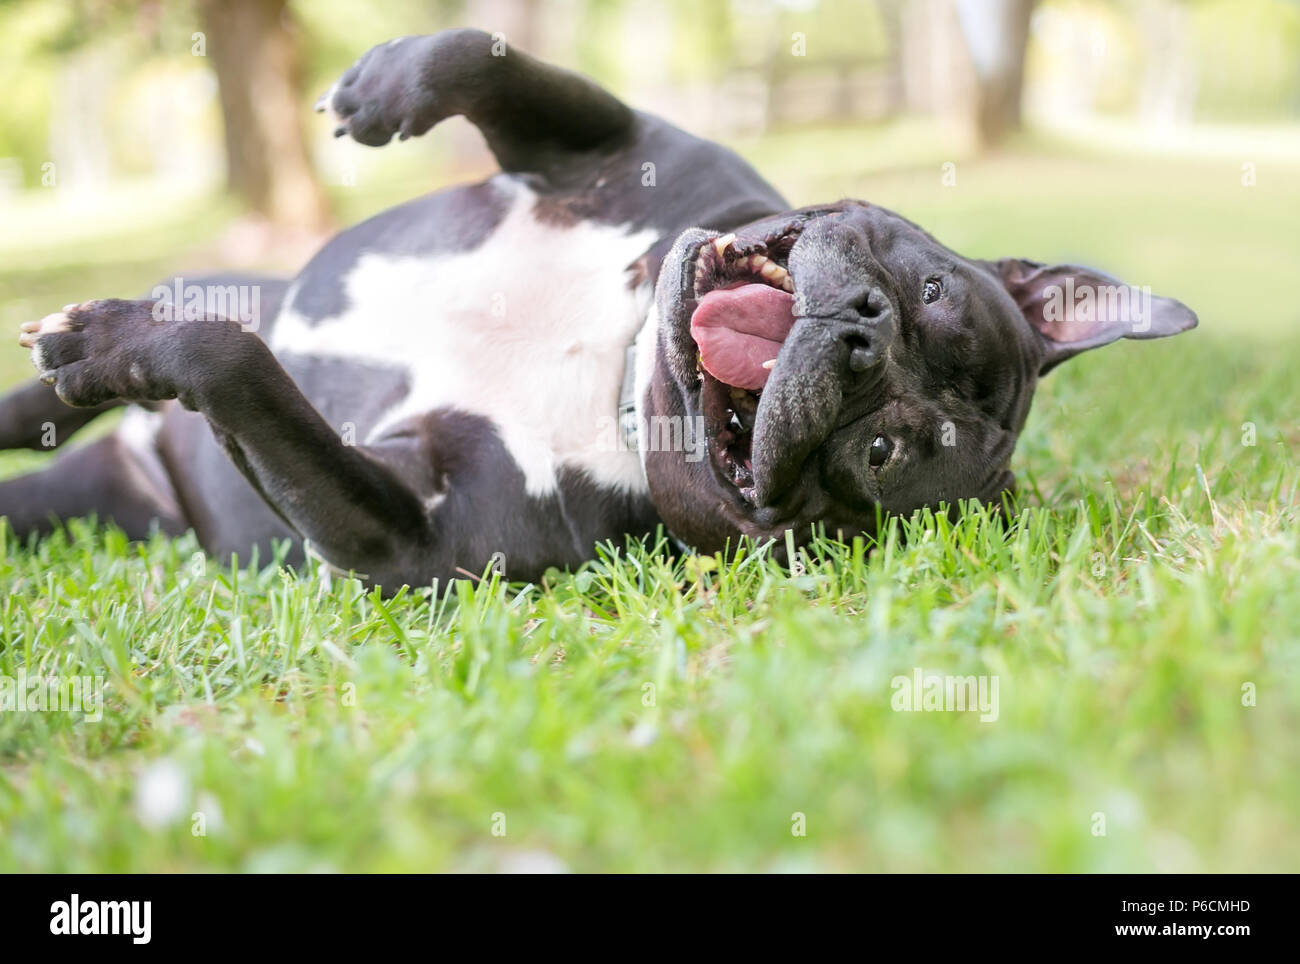 A playful Staffordshire Bull Terrier dog rolling in the grass Stock Photo